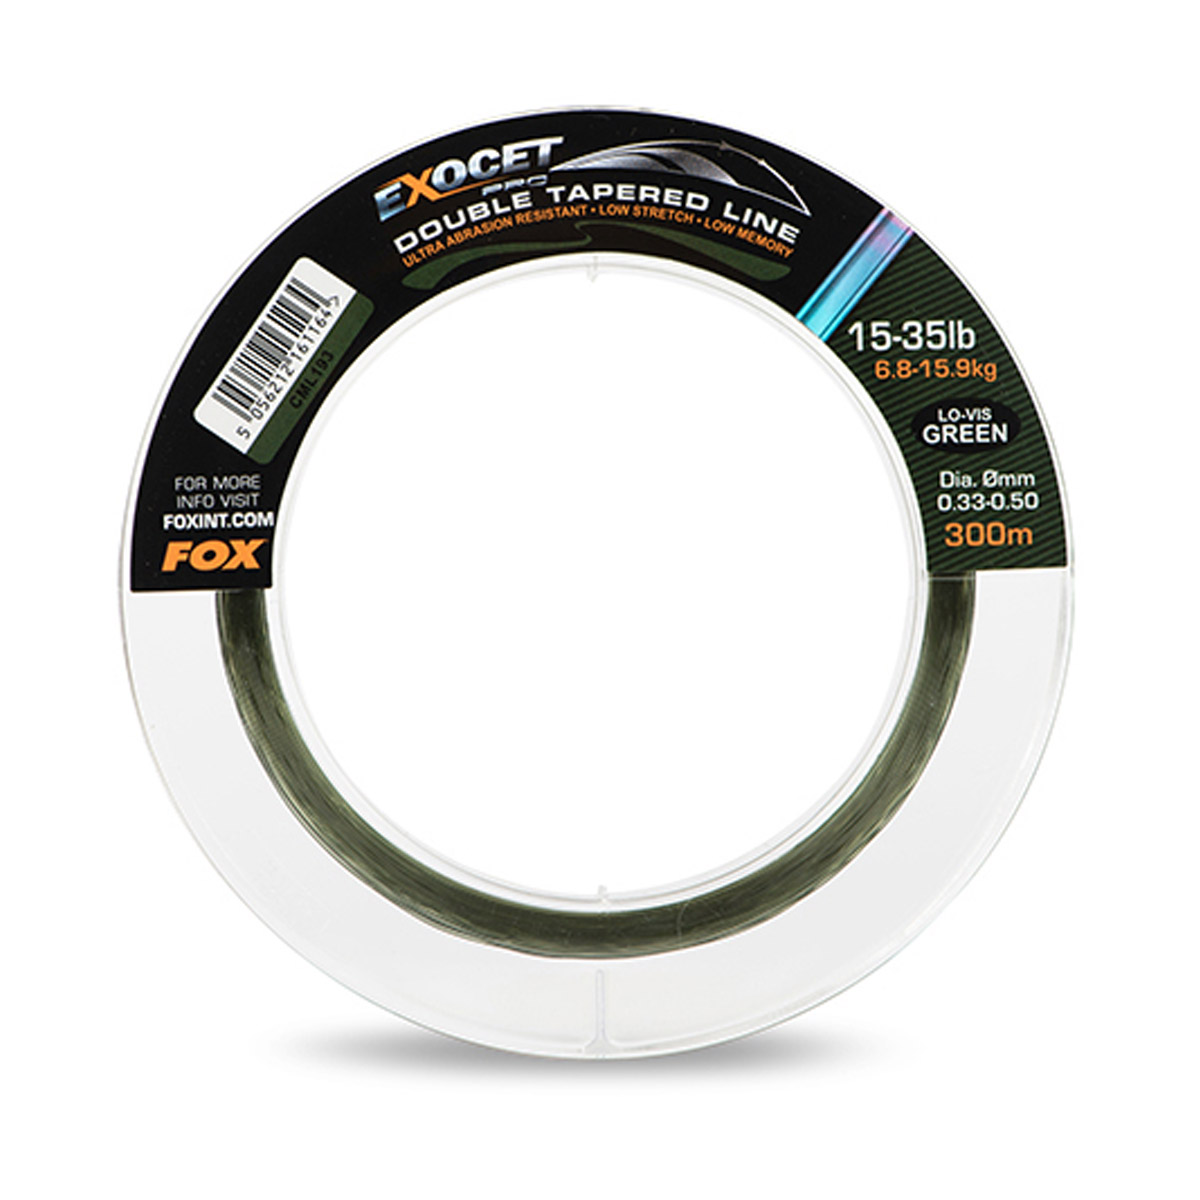 Fox Exocet Pro Double Tapered MainLine